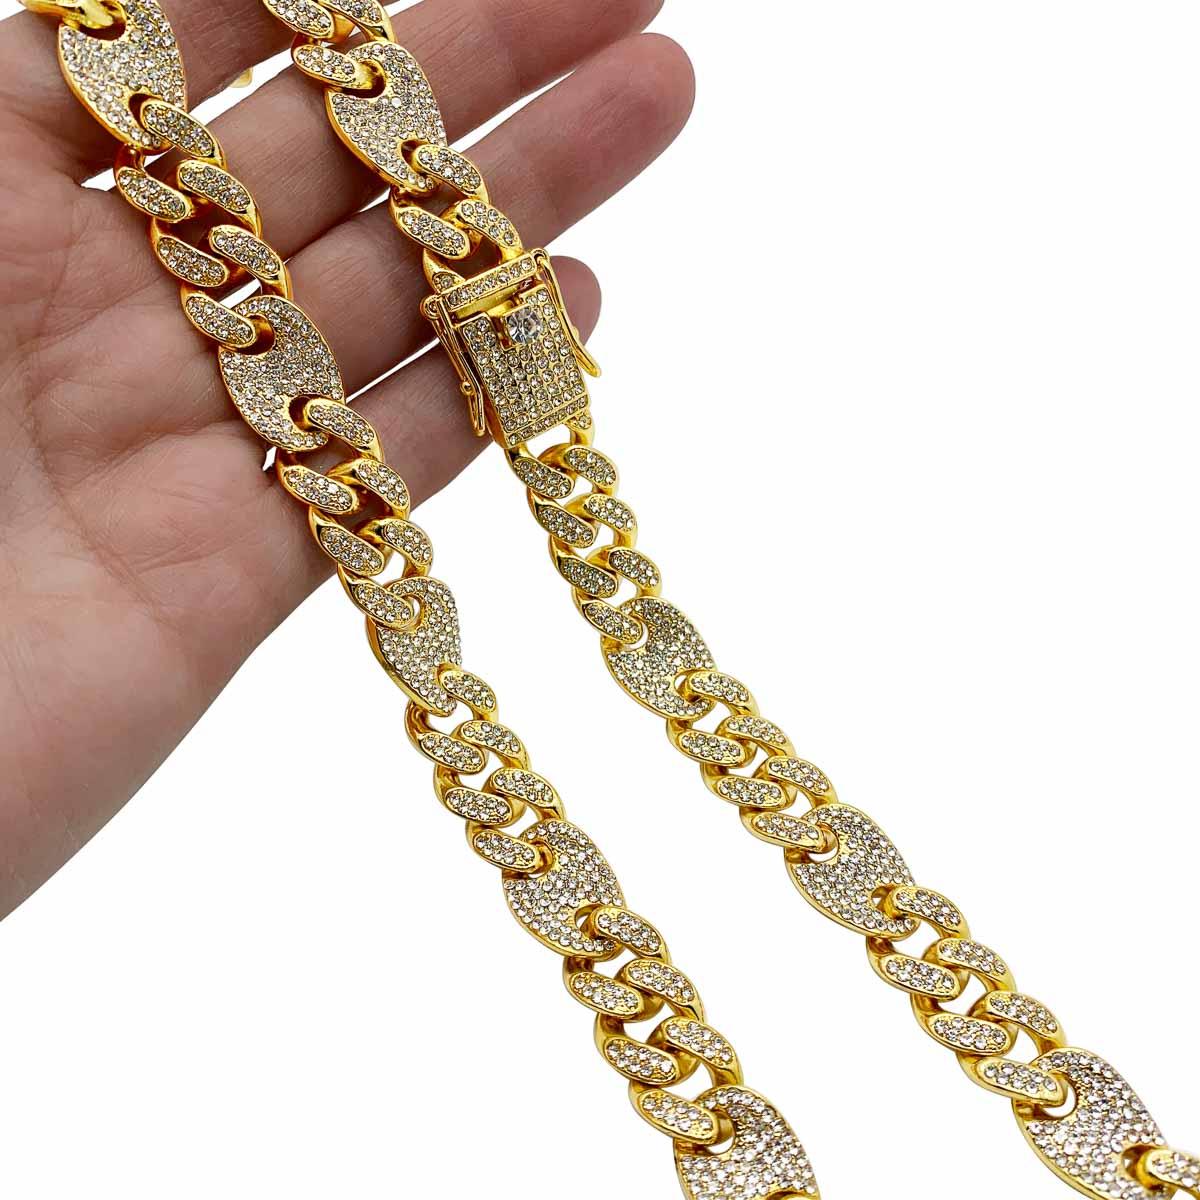 A Crystal Chain Necklace. Featuring chunky links set with crystals to dramatic effect.

Condition: Very good without damage or noteworthy wear.
Materials: Gold plated metal, glass crystal
Fastening: Push in clasp with safety clasp
Approximate